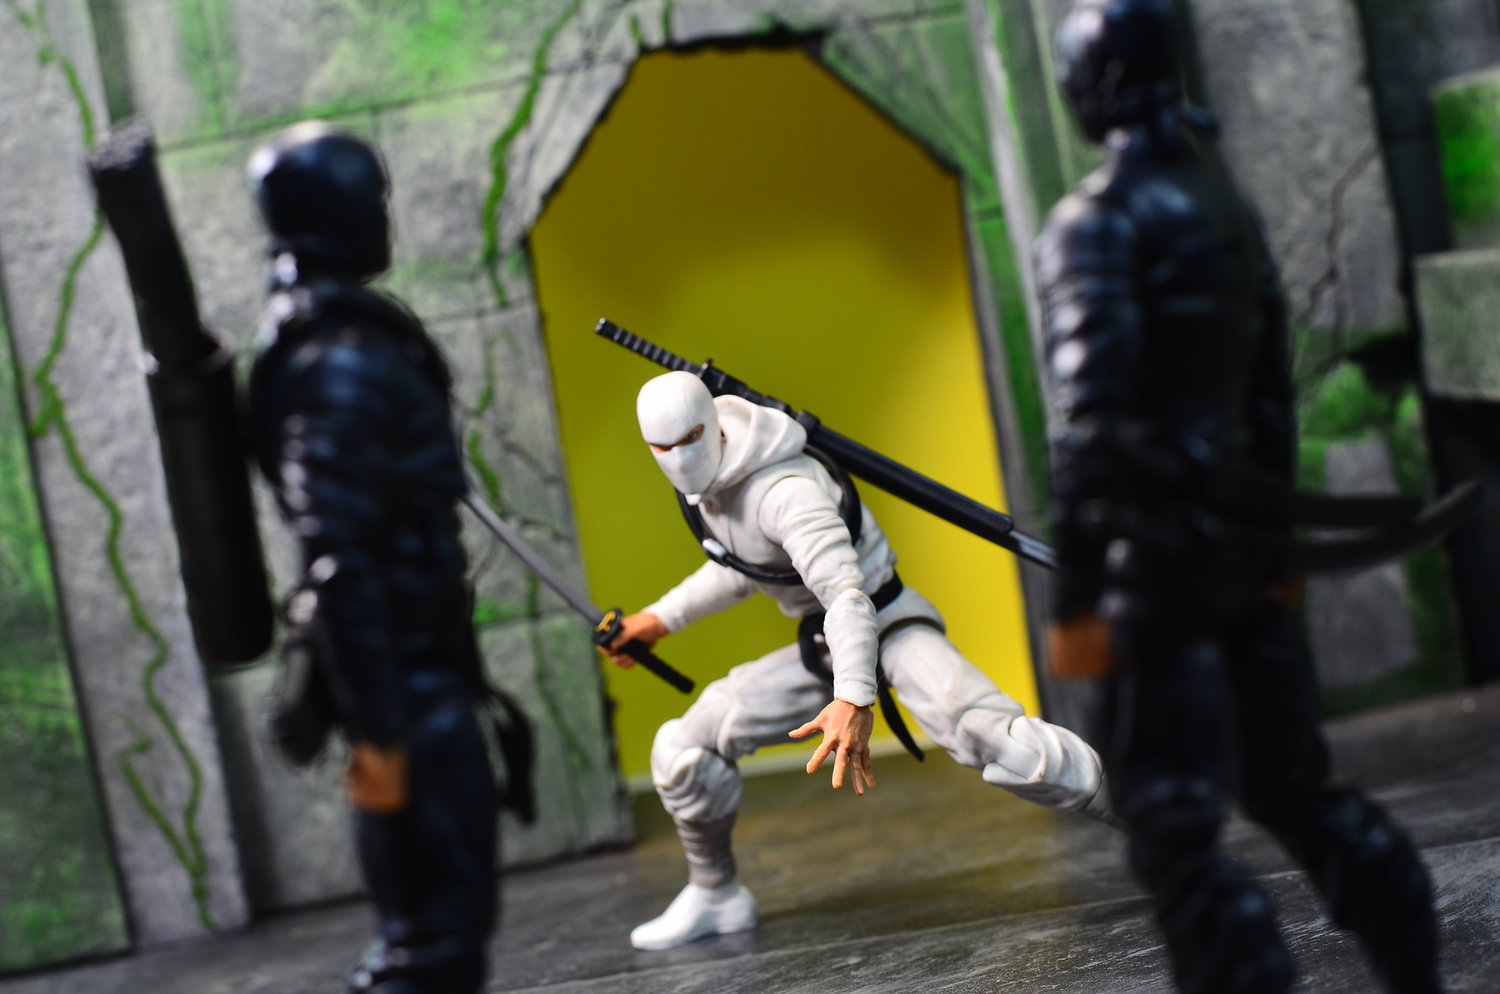 Articulated Icons: Deluxe Ninja Weapons